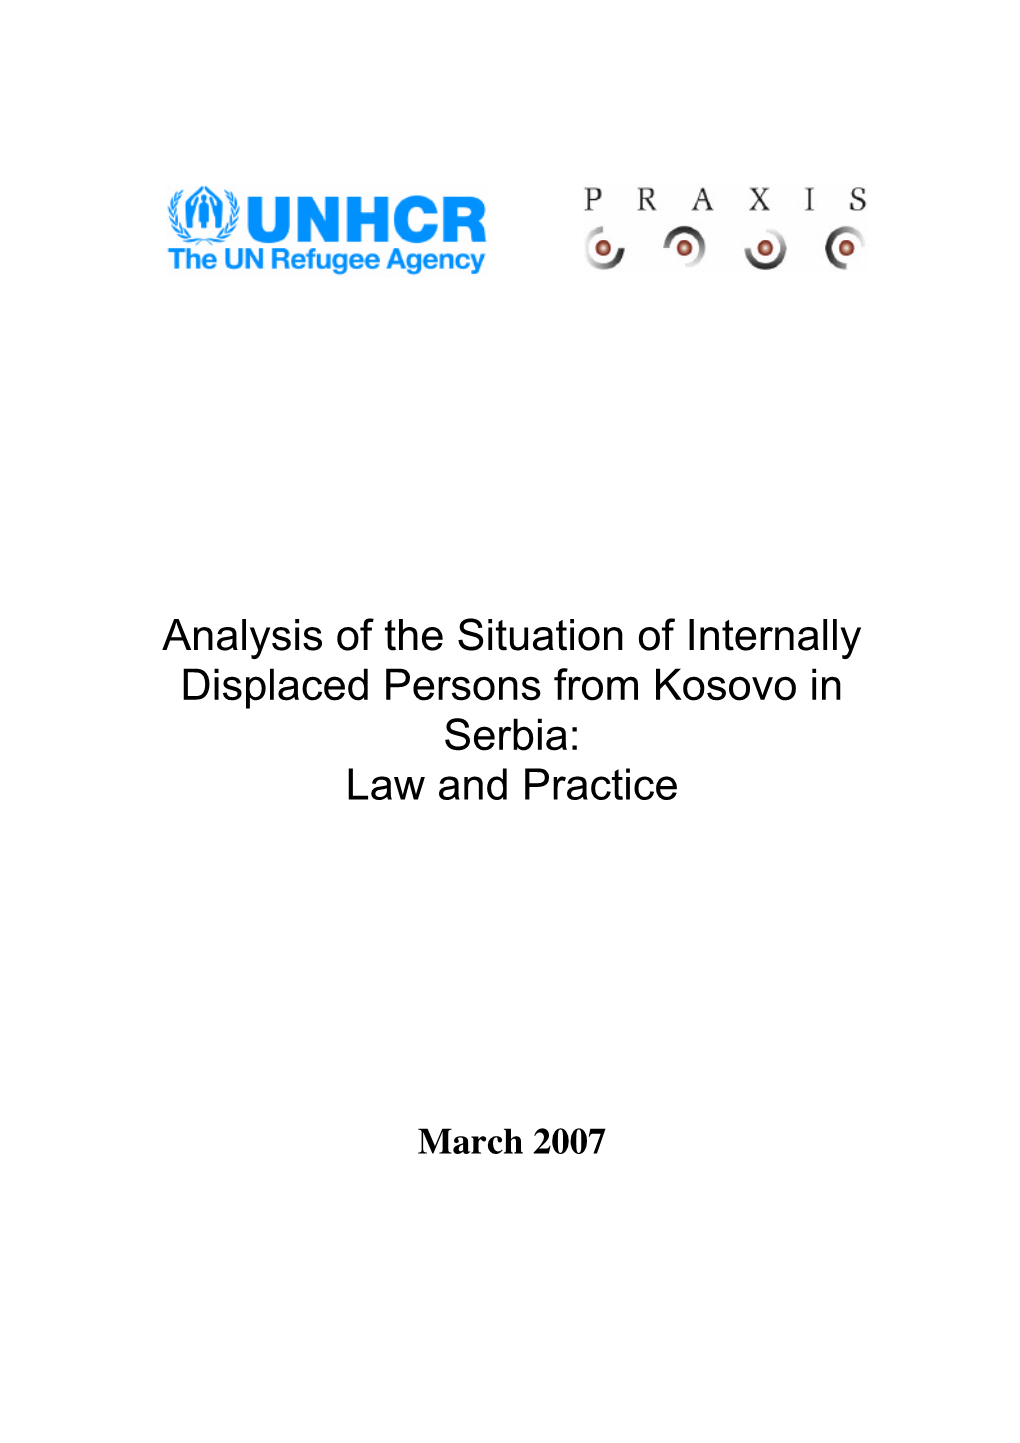 Analysis of the Situation of Internally Displaced Persons from Kosovo in Serbia: Law and Practice